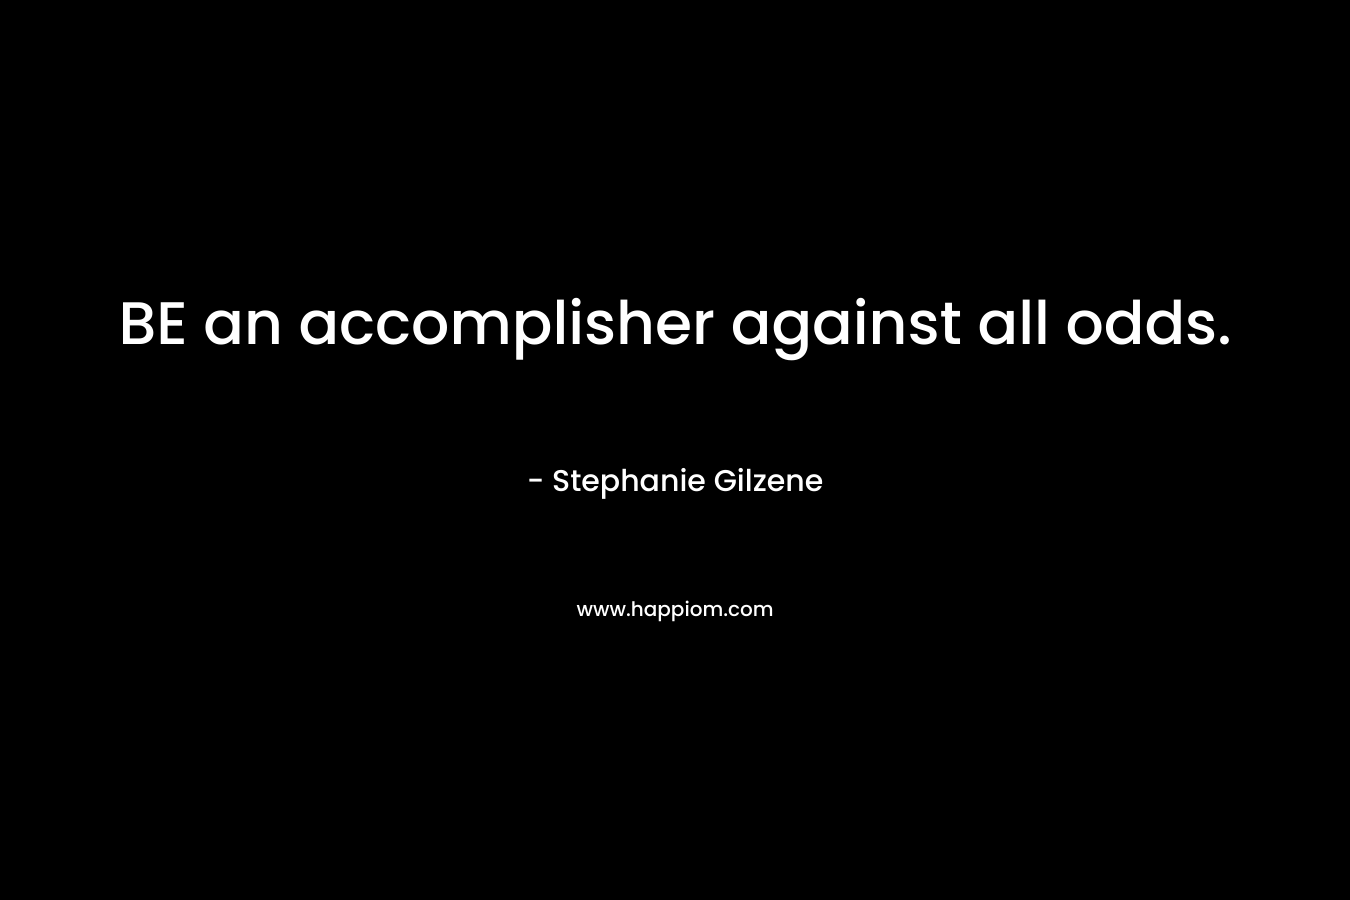 BE an accomplisher against all odds.